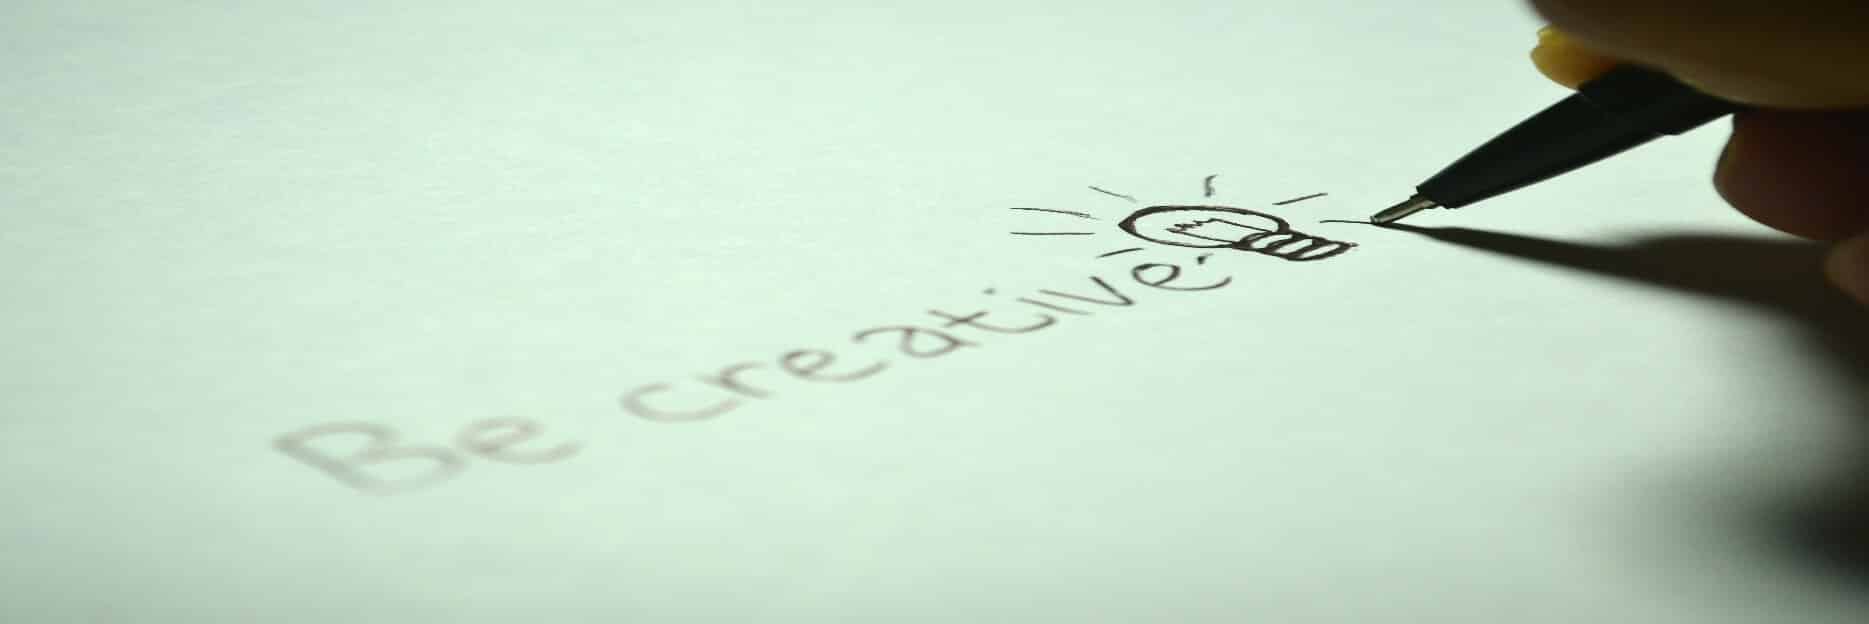 Be Creative - Learn to Draw Outside the Lines Through Executive Coaching